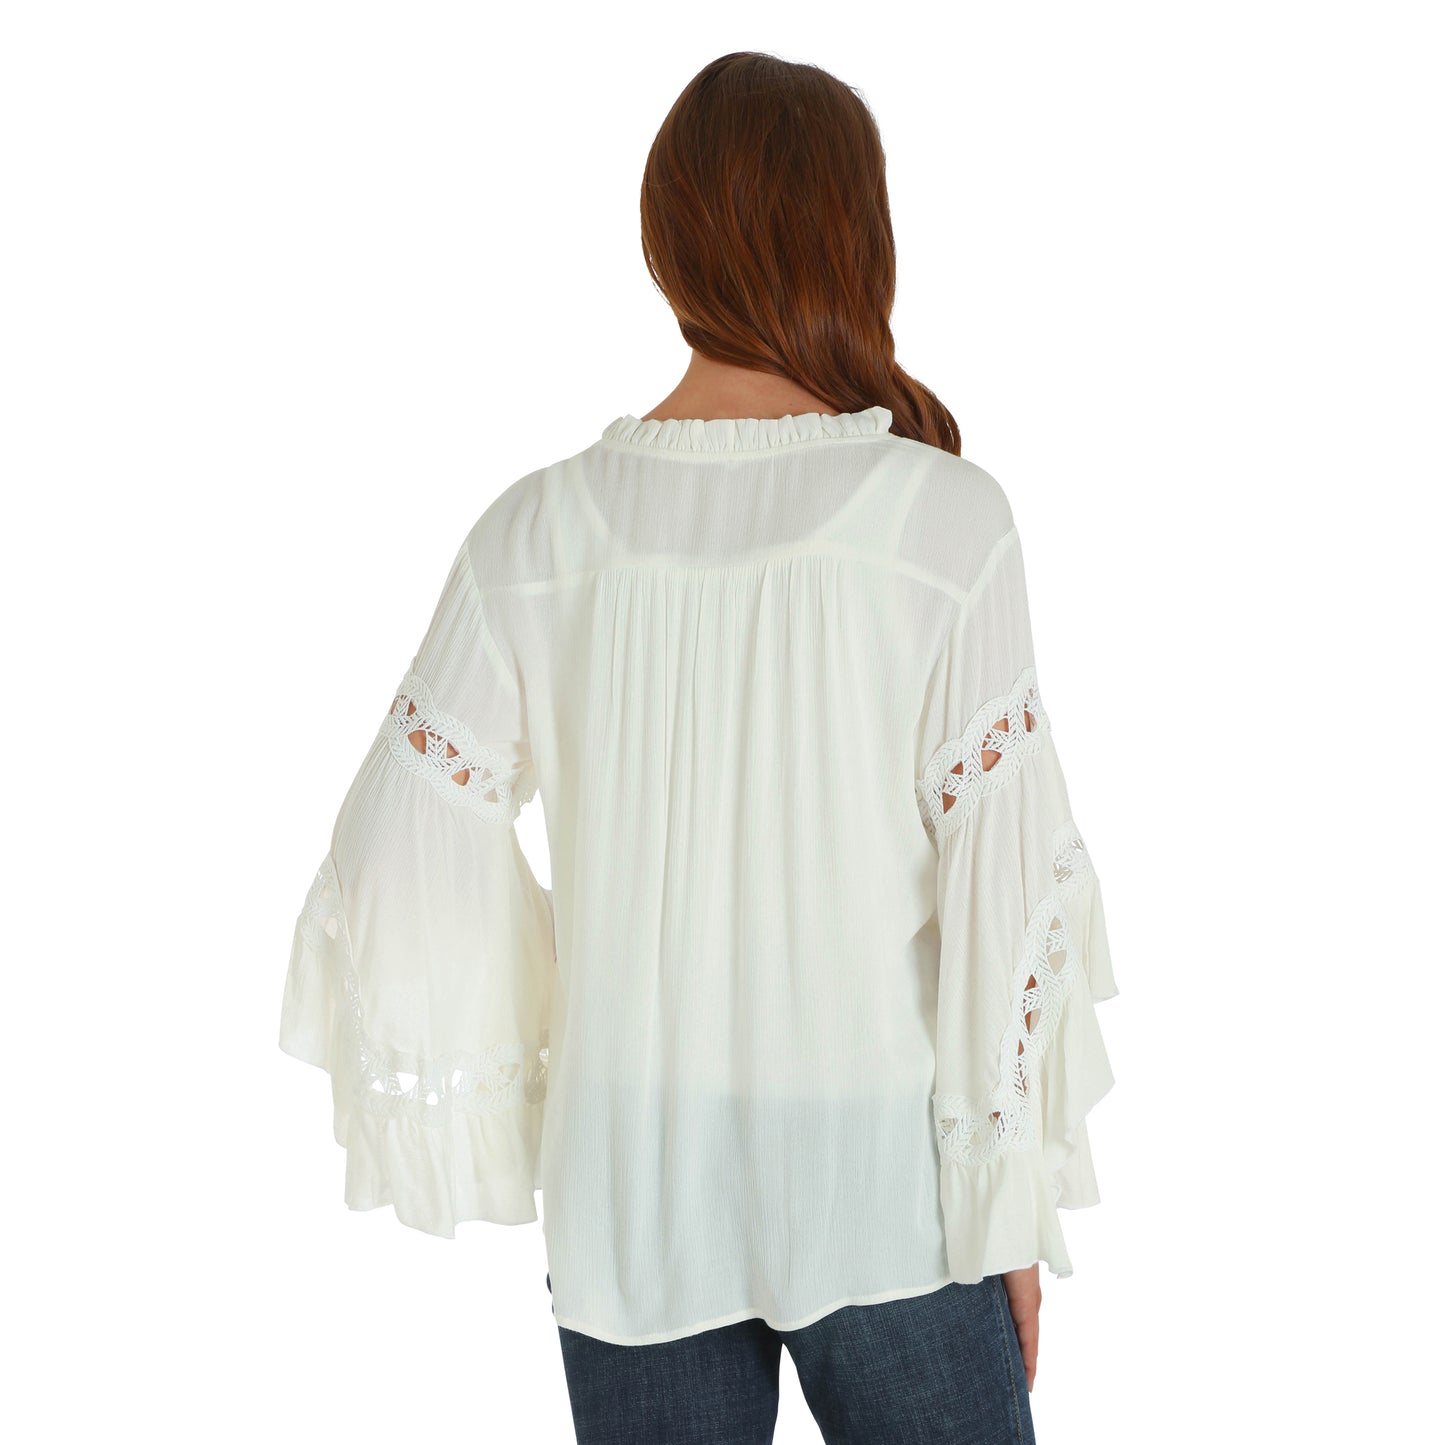 Wrangler Ladies Embroidered Ivory L/S Peasant Top - LW2048M